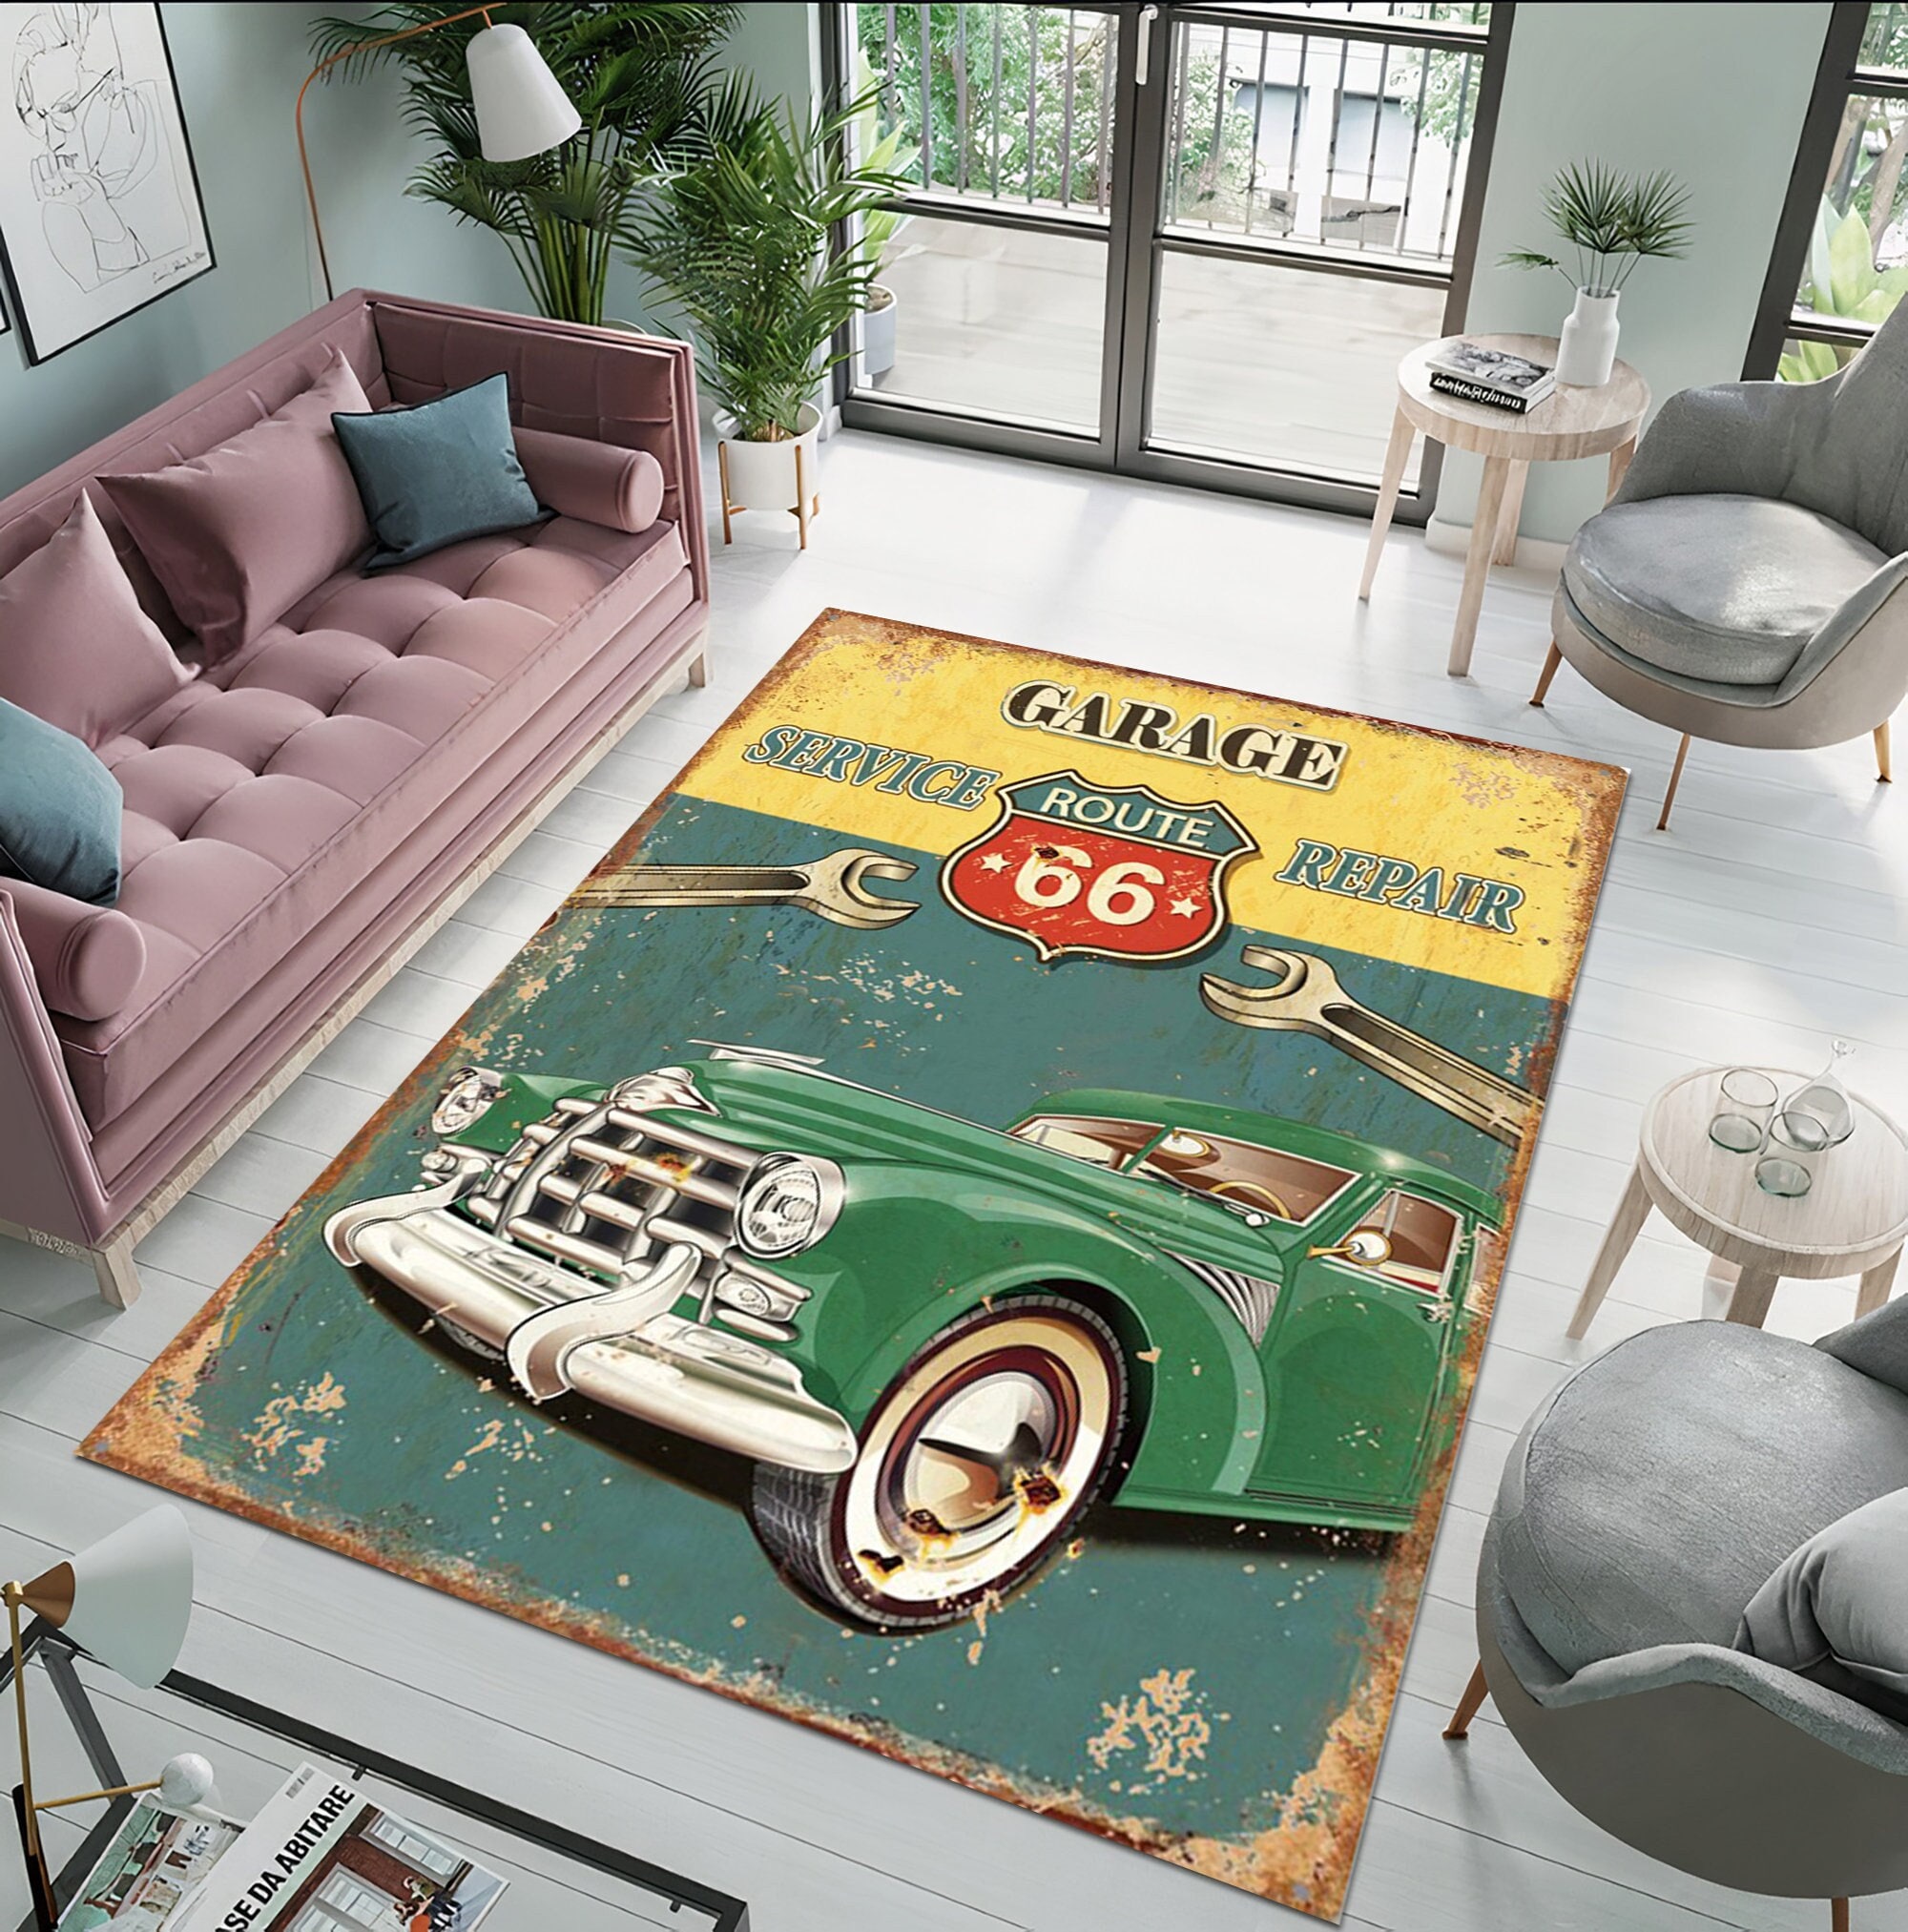 Area Rug perfect for garage